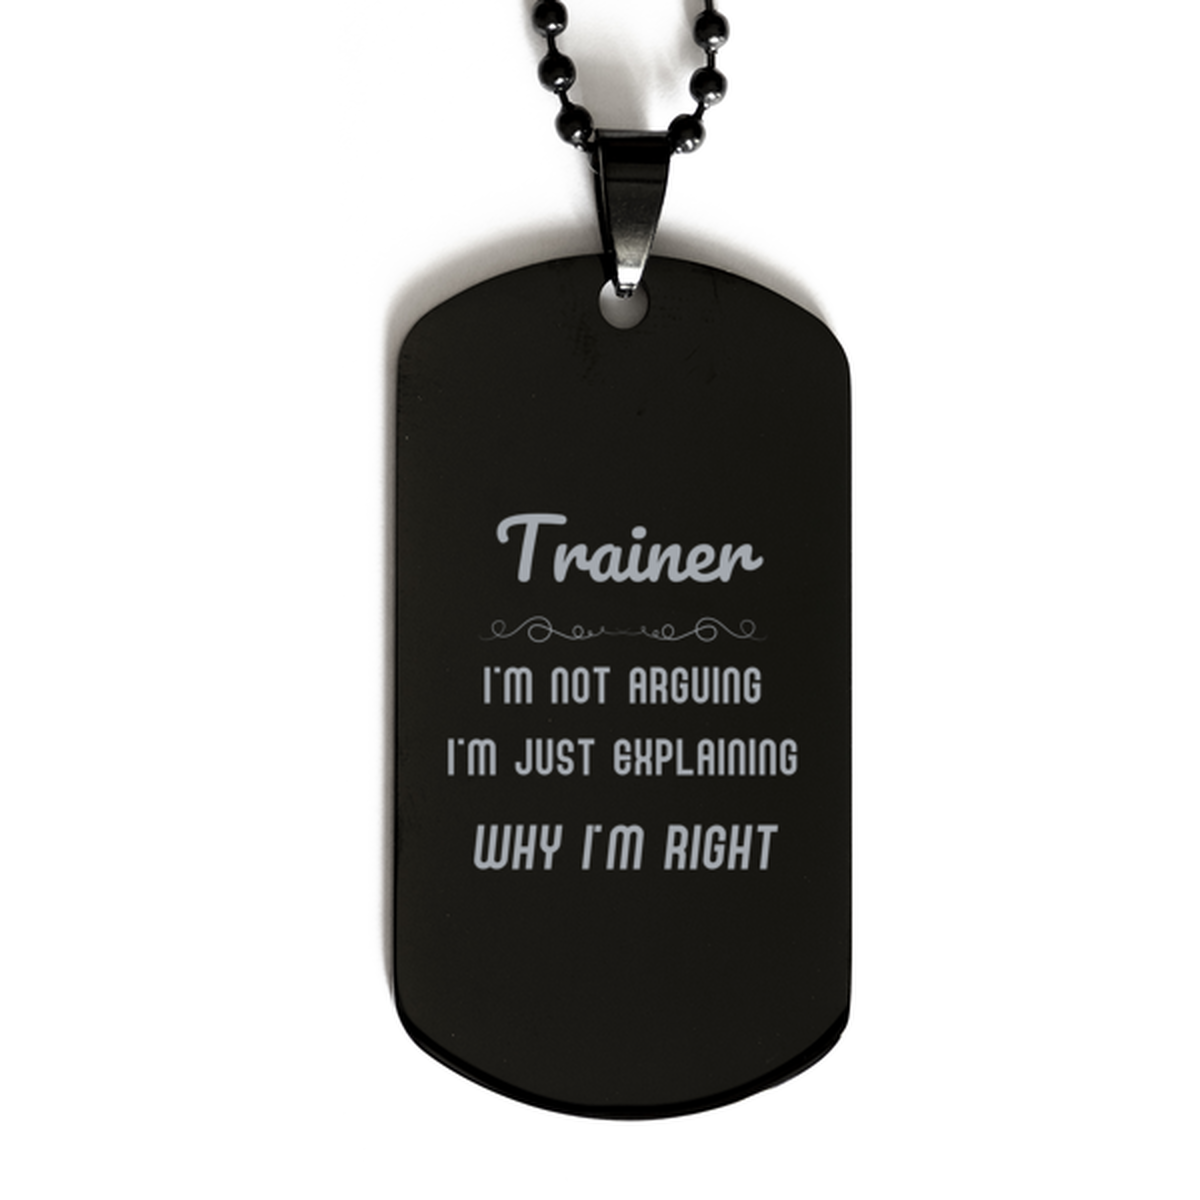 Trainer I'm not Arguing. I'm Just Explaining Why I'm RIGHT Black Dog Tag, Funny Saying Quote Trainer Gifts For Trainer Graduation Birthday Christmas Gifts for Men Women Coworker